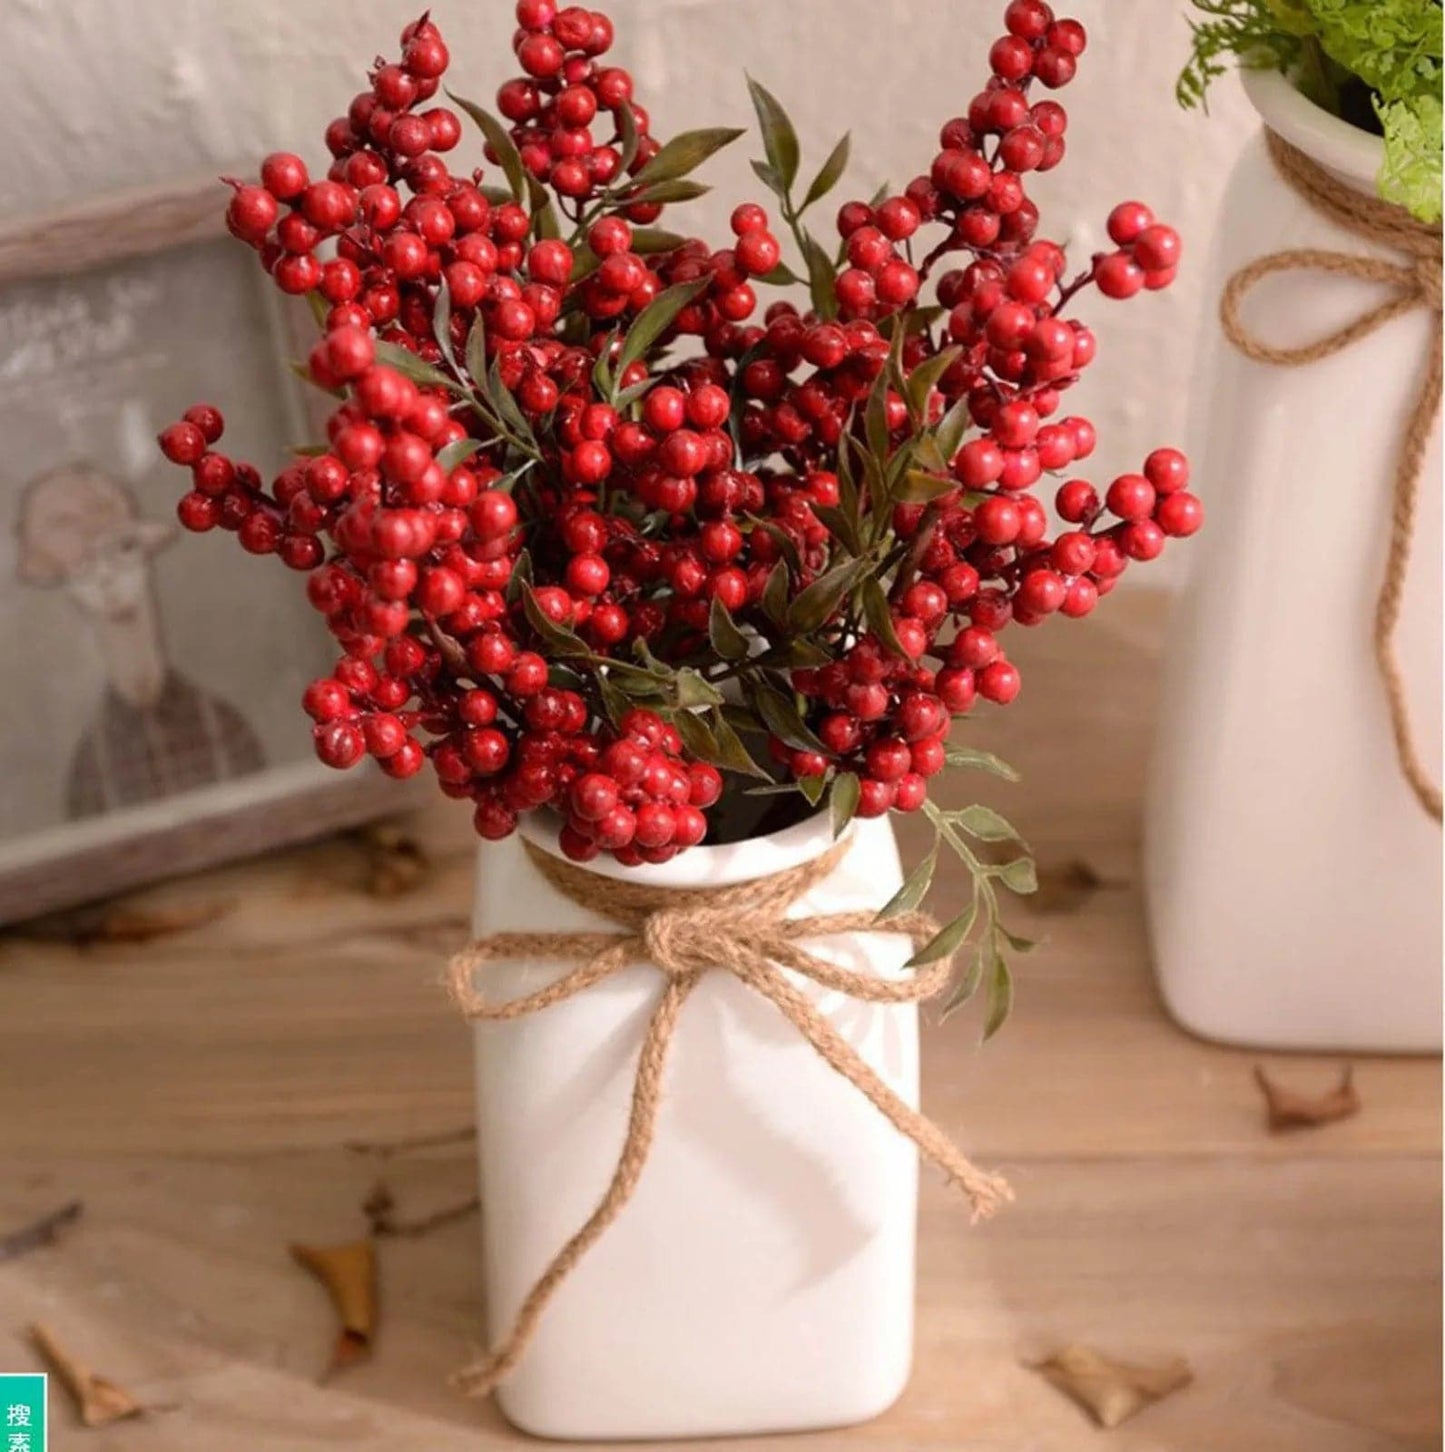 10Pcs Artificial Red Berries Branches Christmas Foam Holly Berry Stems DIY Garland Xmas Tree Decor New Year Party Decorations